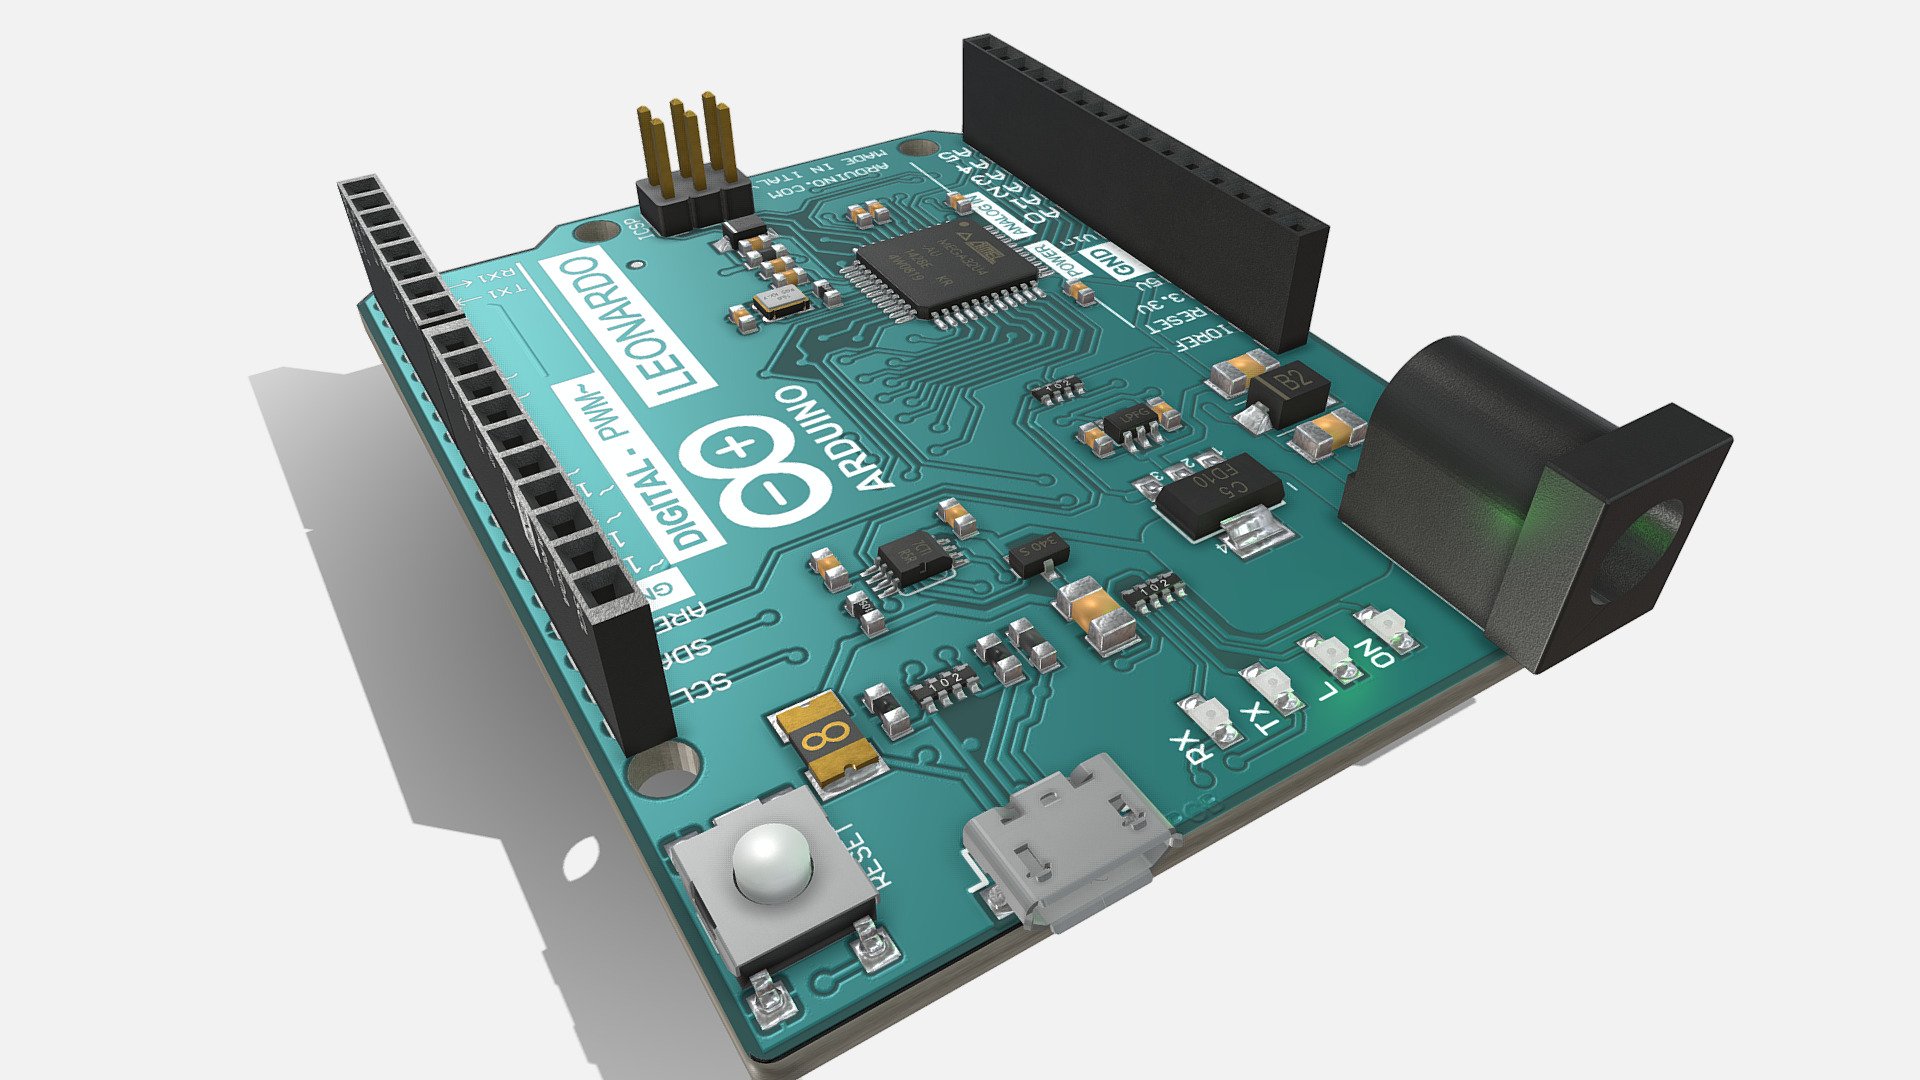 3D Model of the ARDUINO LEONARDO. Description is visible here : https://store.arduino.cc/arduino-leonardo-with-headers

Model designed from the EAGLE files availble in the web site and with blender tools v2.81.

All components can be modified (translate, delete,…). Don’t hesitate to comment somes hardware references that you want to see in sketchfab - Arduino Leonardo - Buy Royalty Free 3D model by F2A (@Fa_Sketch) 3d model